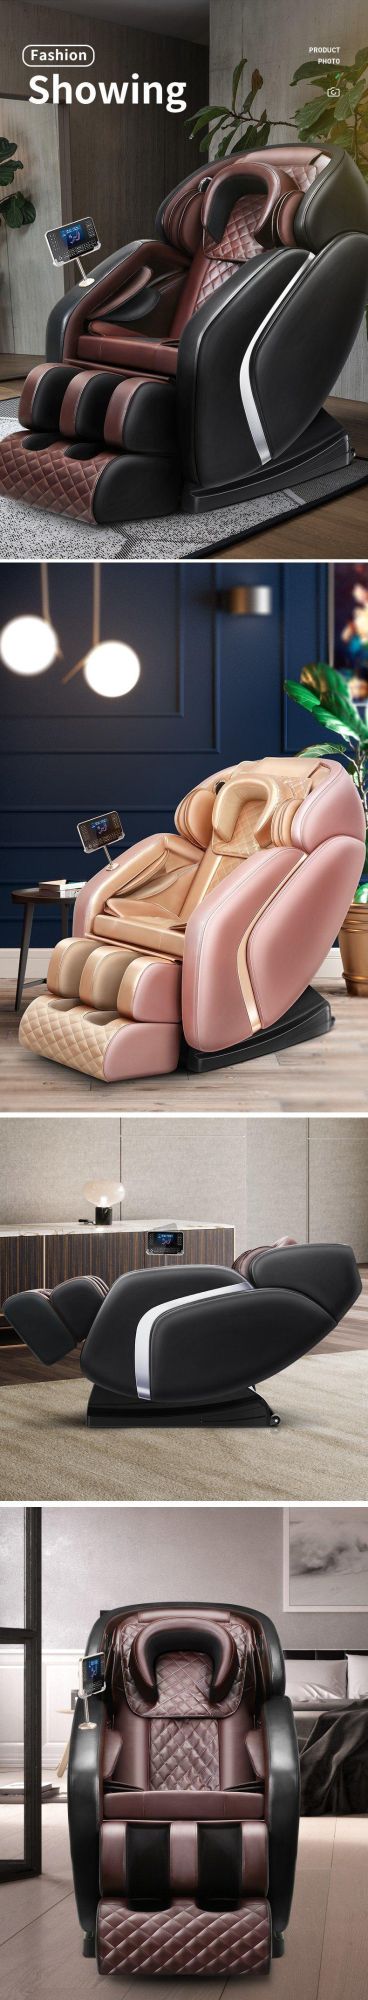 Newest 3D Multifunctional Massage Equipment China Recliner Chair Remote Control